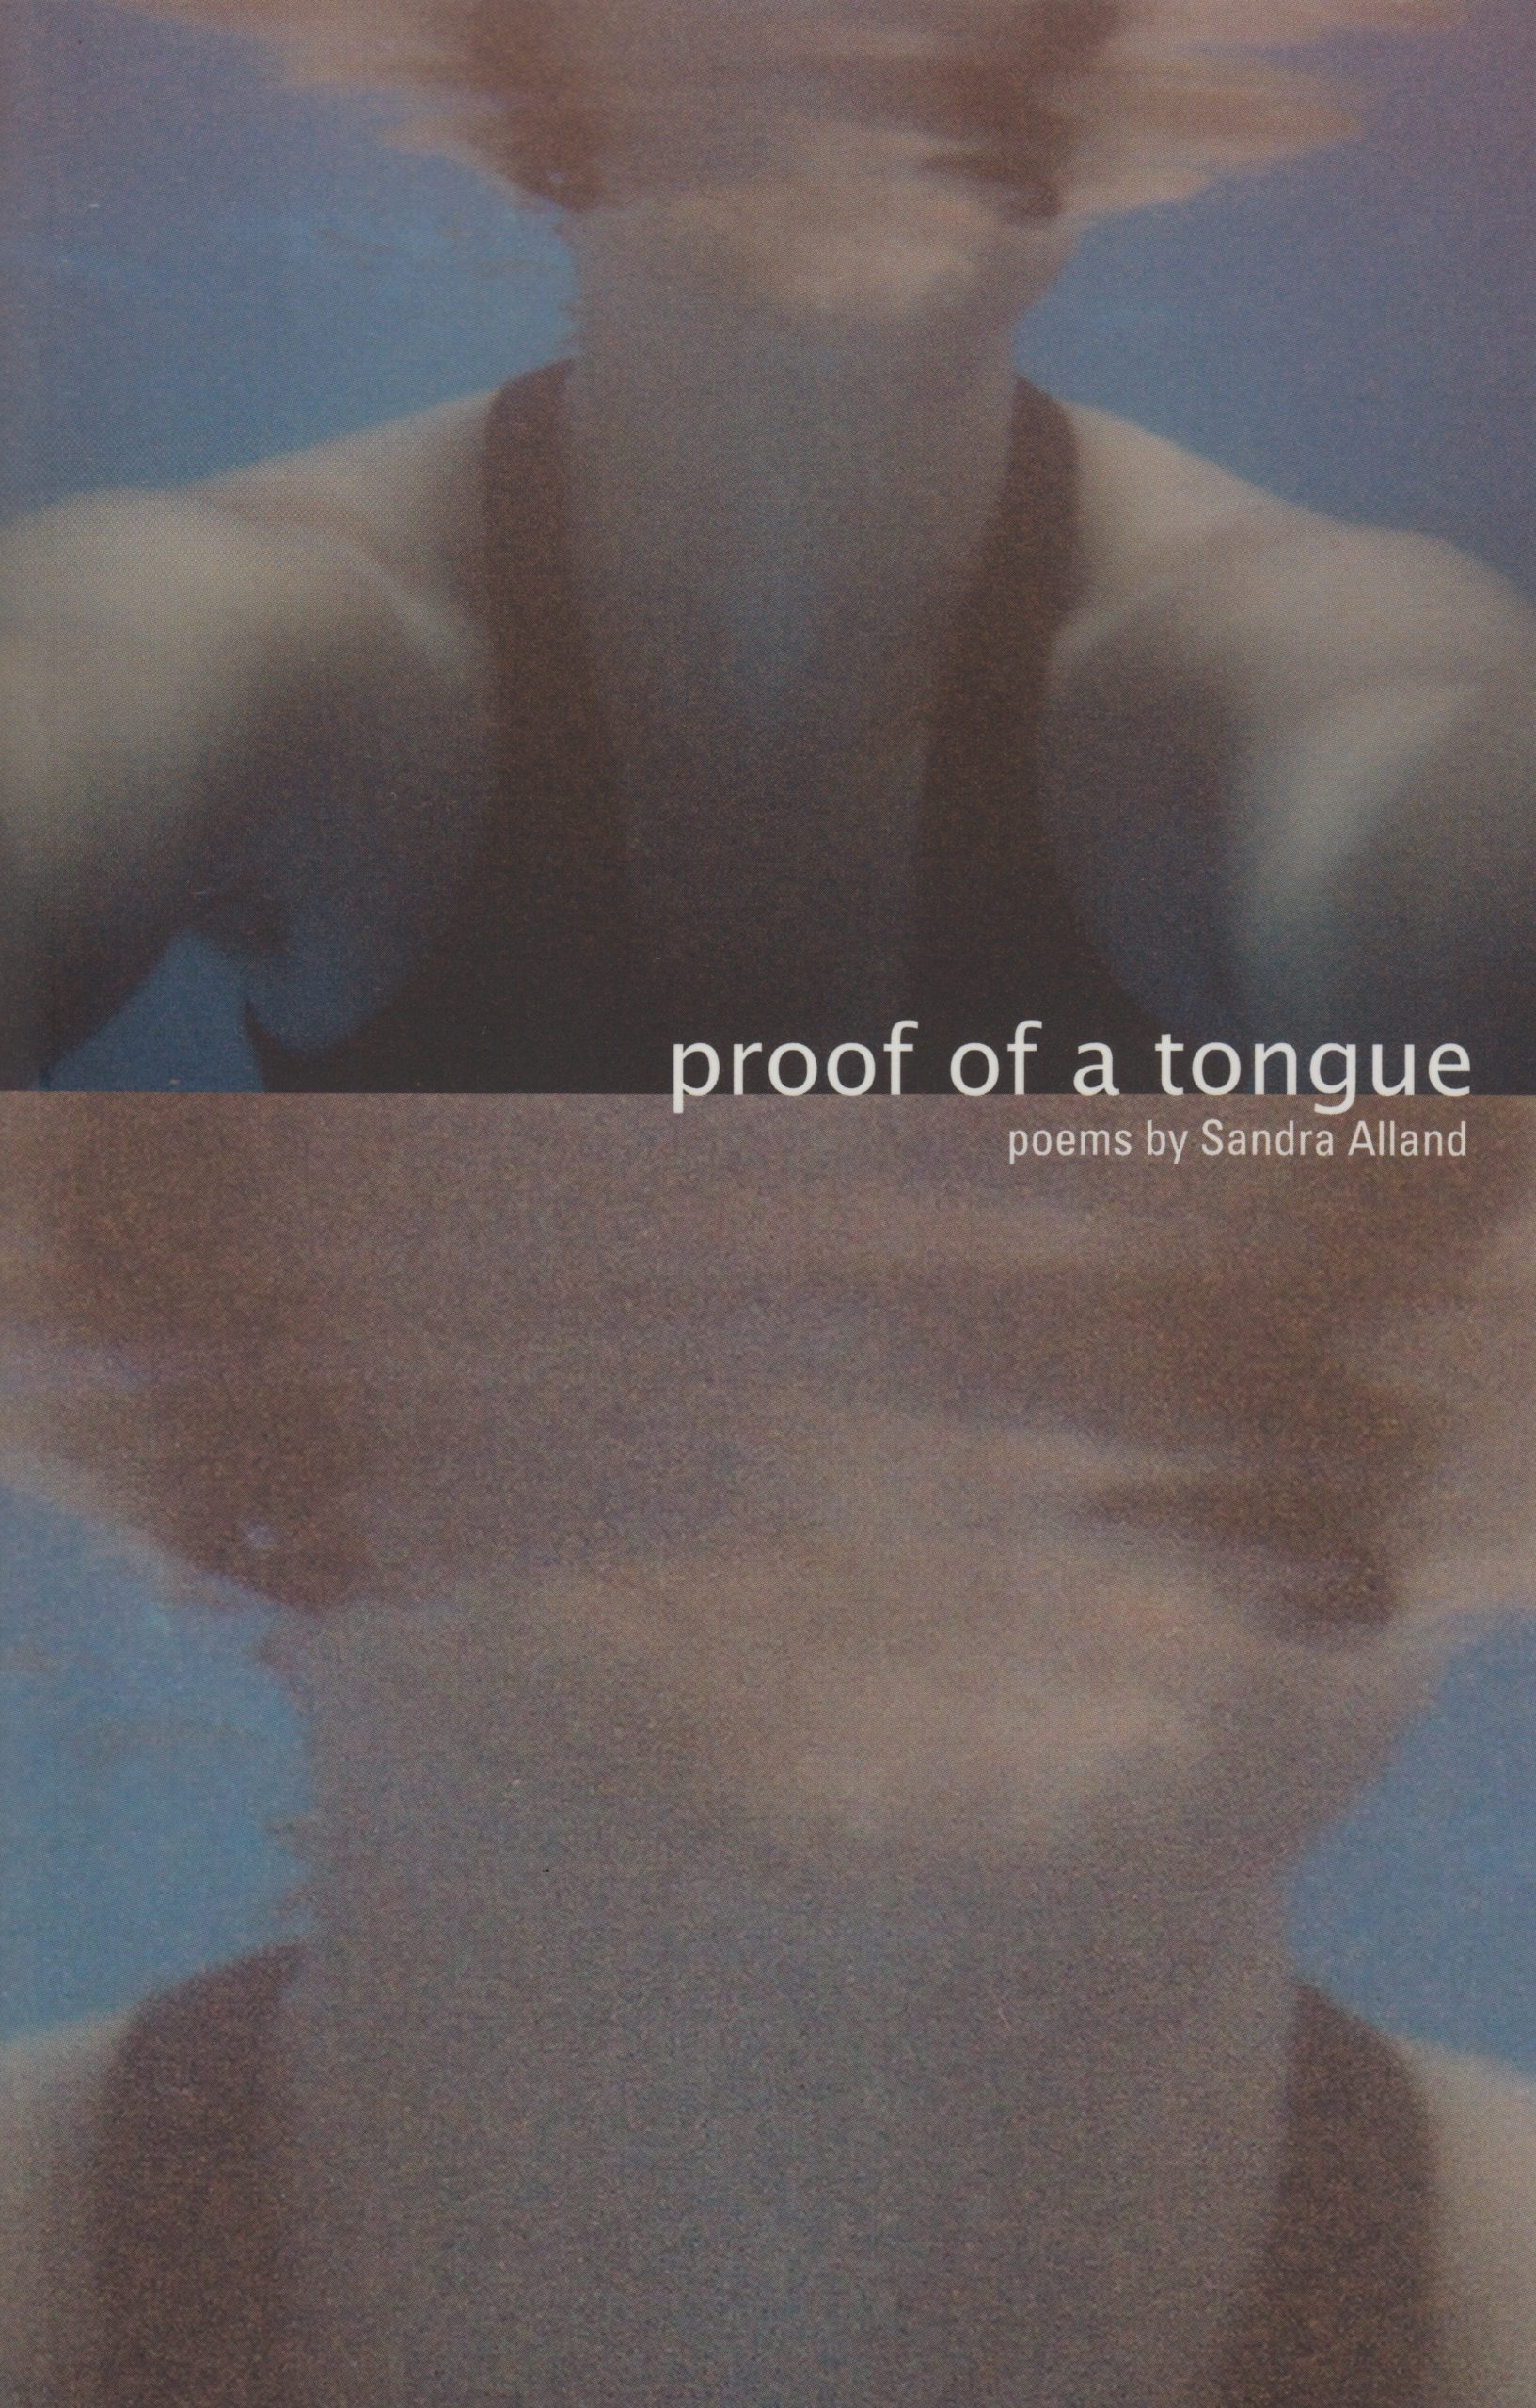 The cover of Proof of a Tongue by Sandra Alland. The title and author’s name are both right-aligned in white in the middle of the cover, above and below a line separating two photos. The top photo is a selfie of a person swimming under blue water, from upper torso all the way to the chin. Their face is ablve the water and therefore blurred. The photo repeats, zoomed in to the chin and blurred face, on the bottom half of the cover.